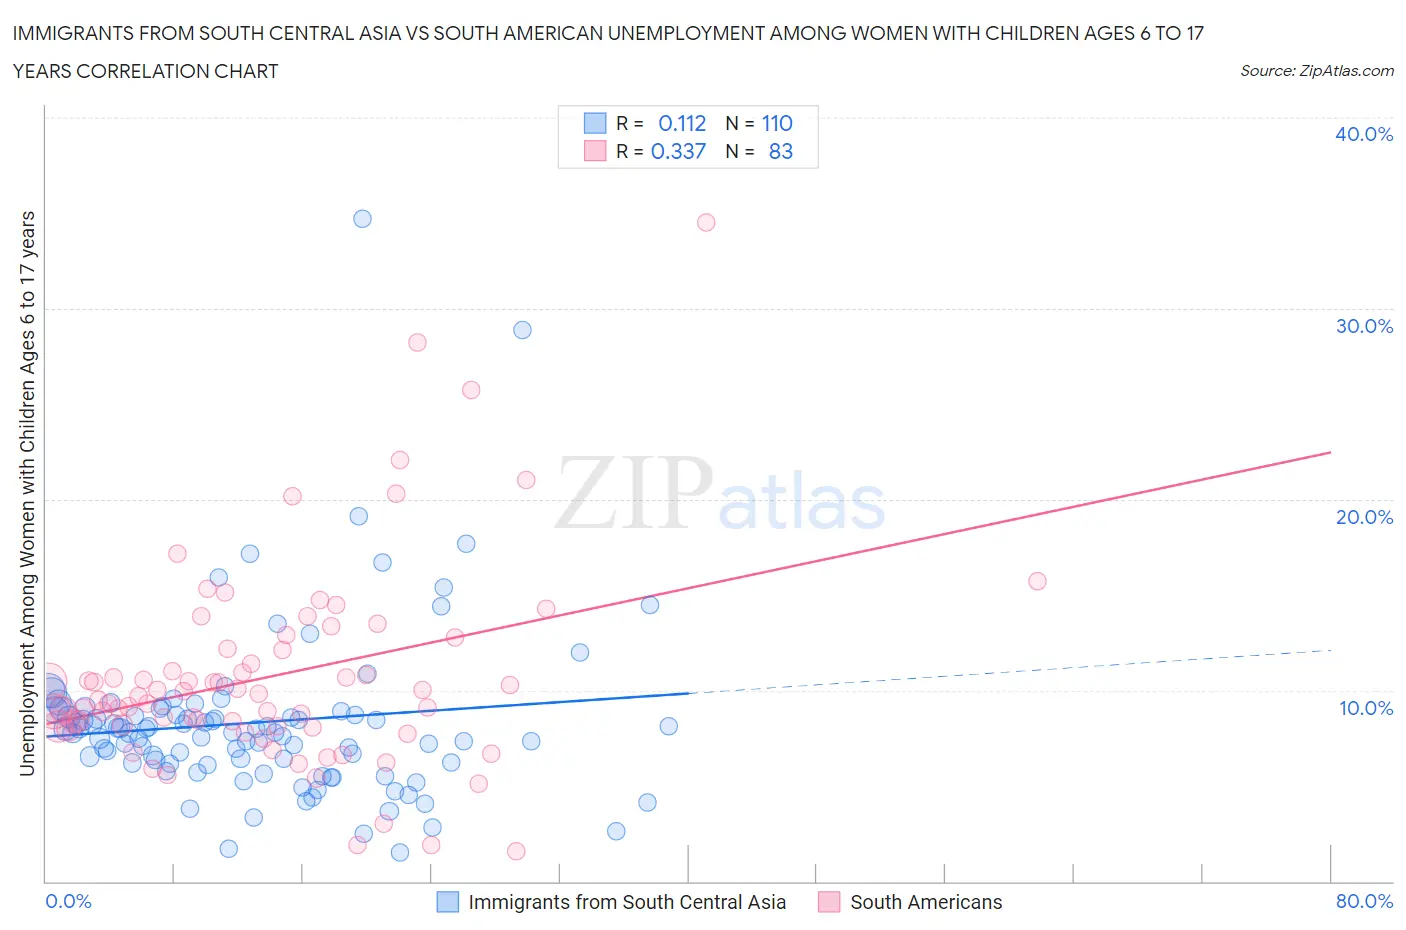 Immigrants from South Central Asia vs South American Unemployment Among Women with Children Ages 6 to 17 years